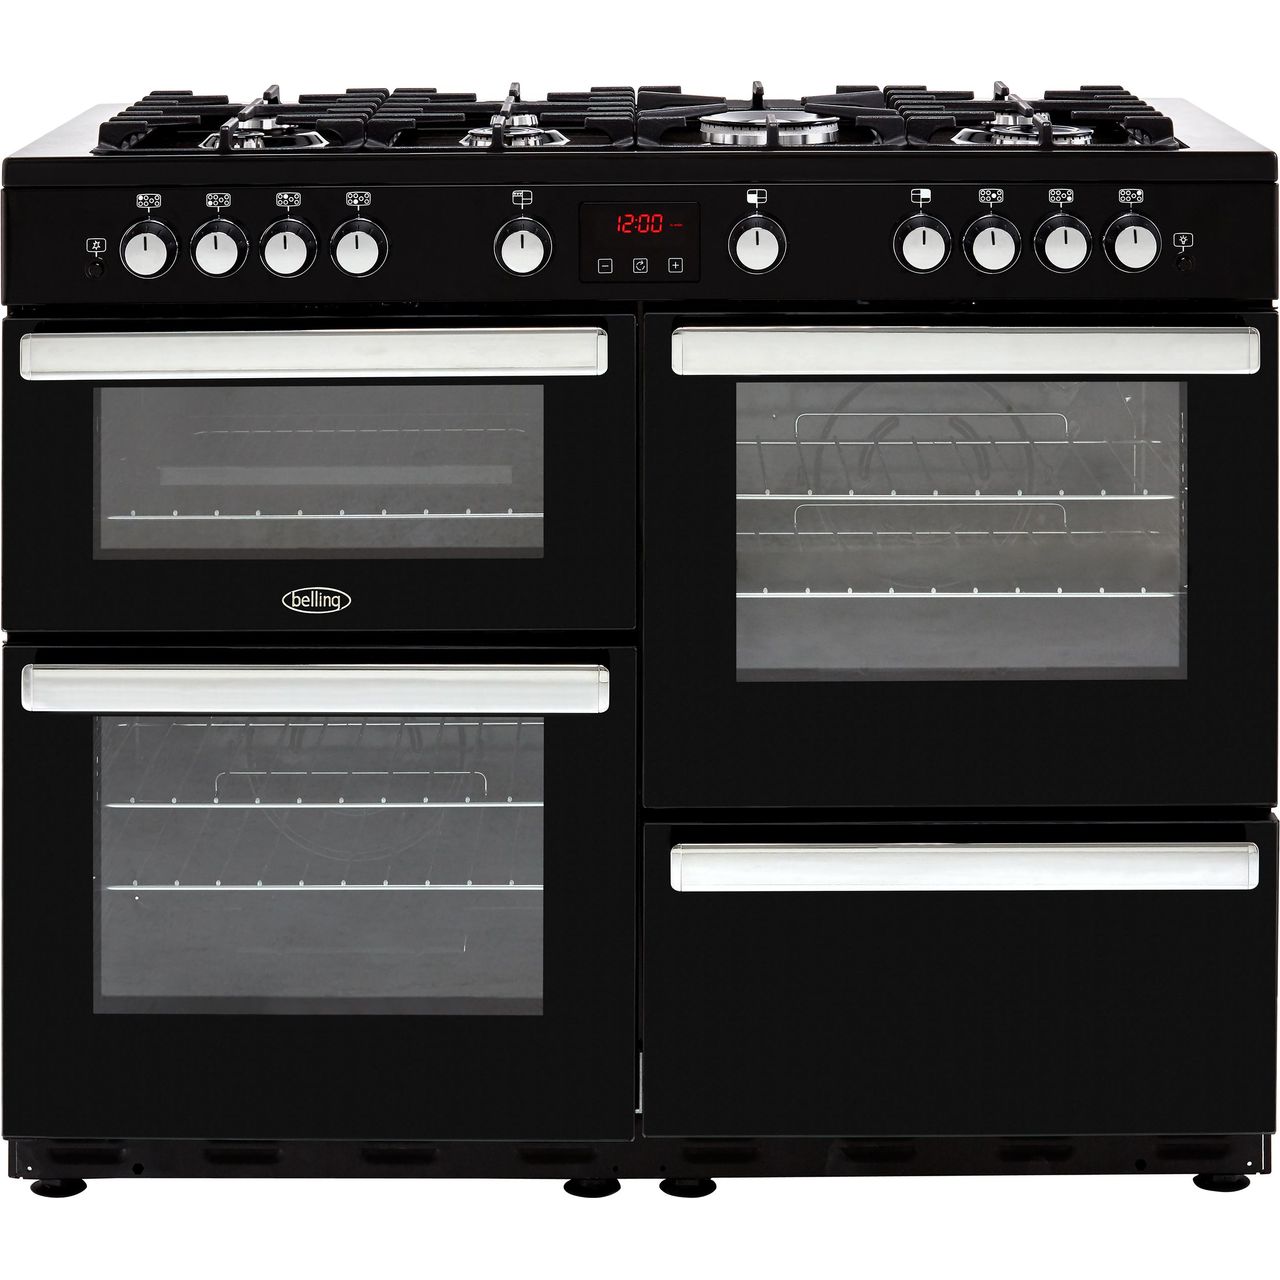 Belling Cookcentre110G 110cm Gas Range Cooker Review